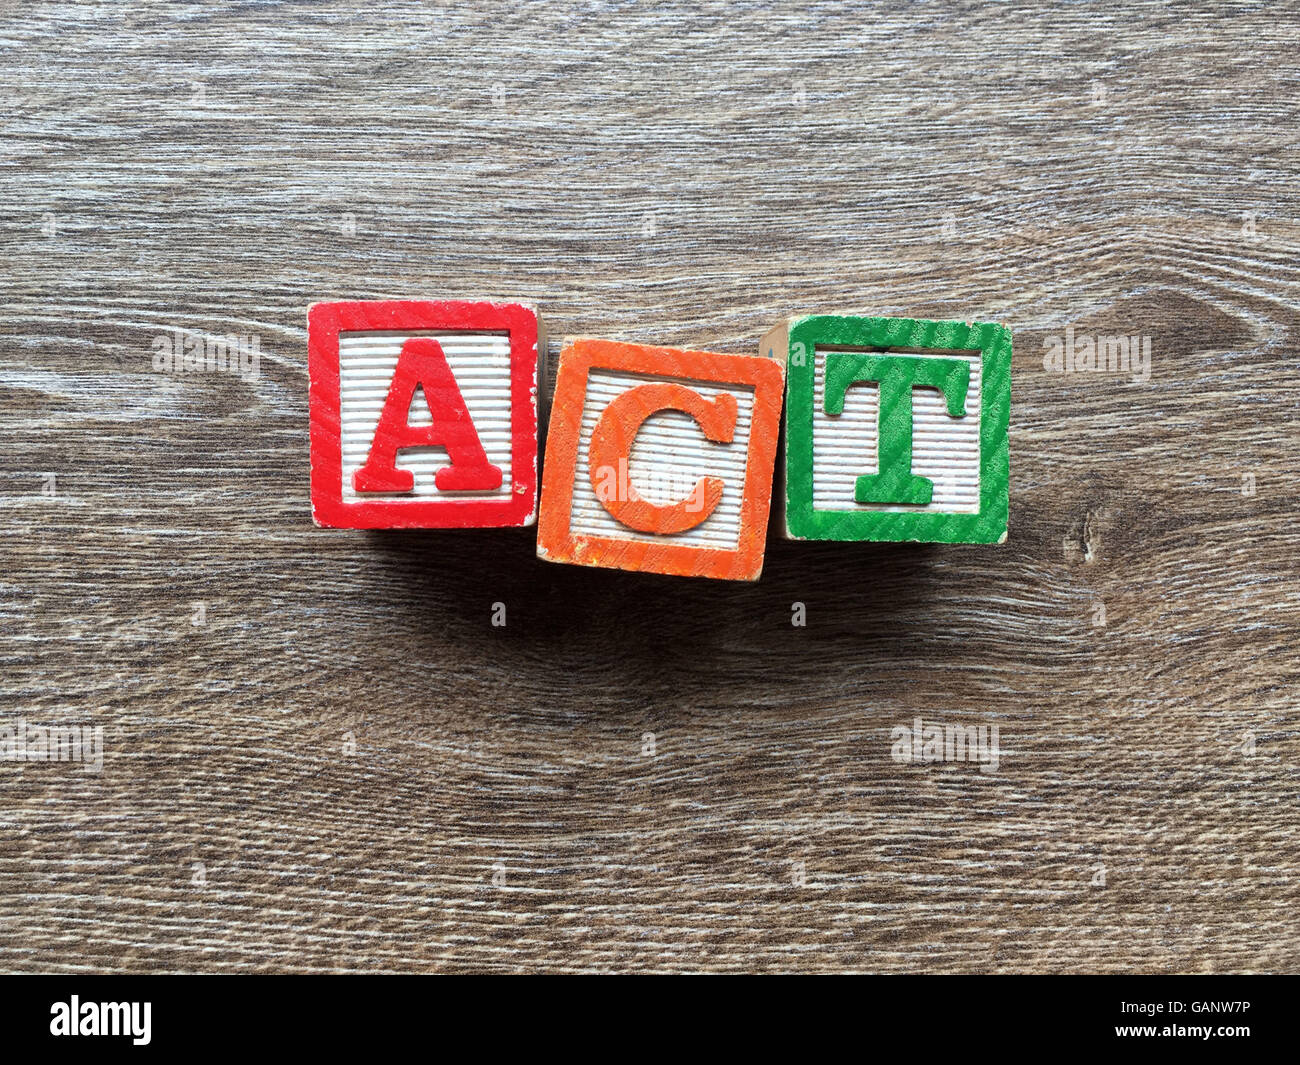 ACT word made with toy wood blocks letters Stock Photo